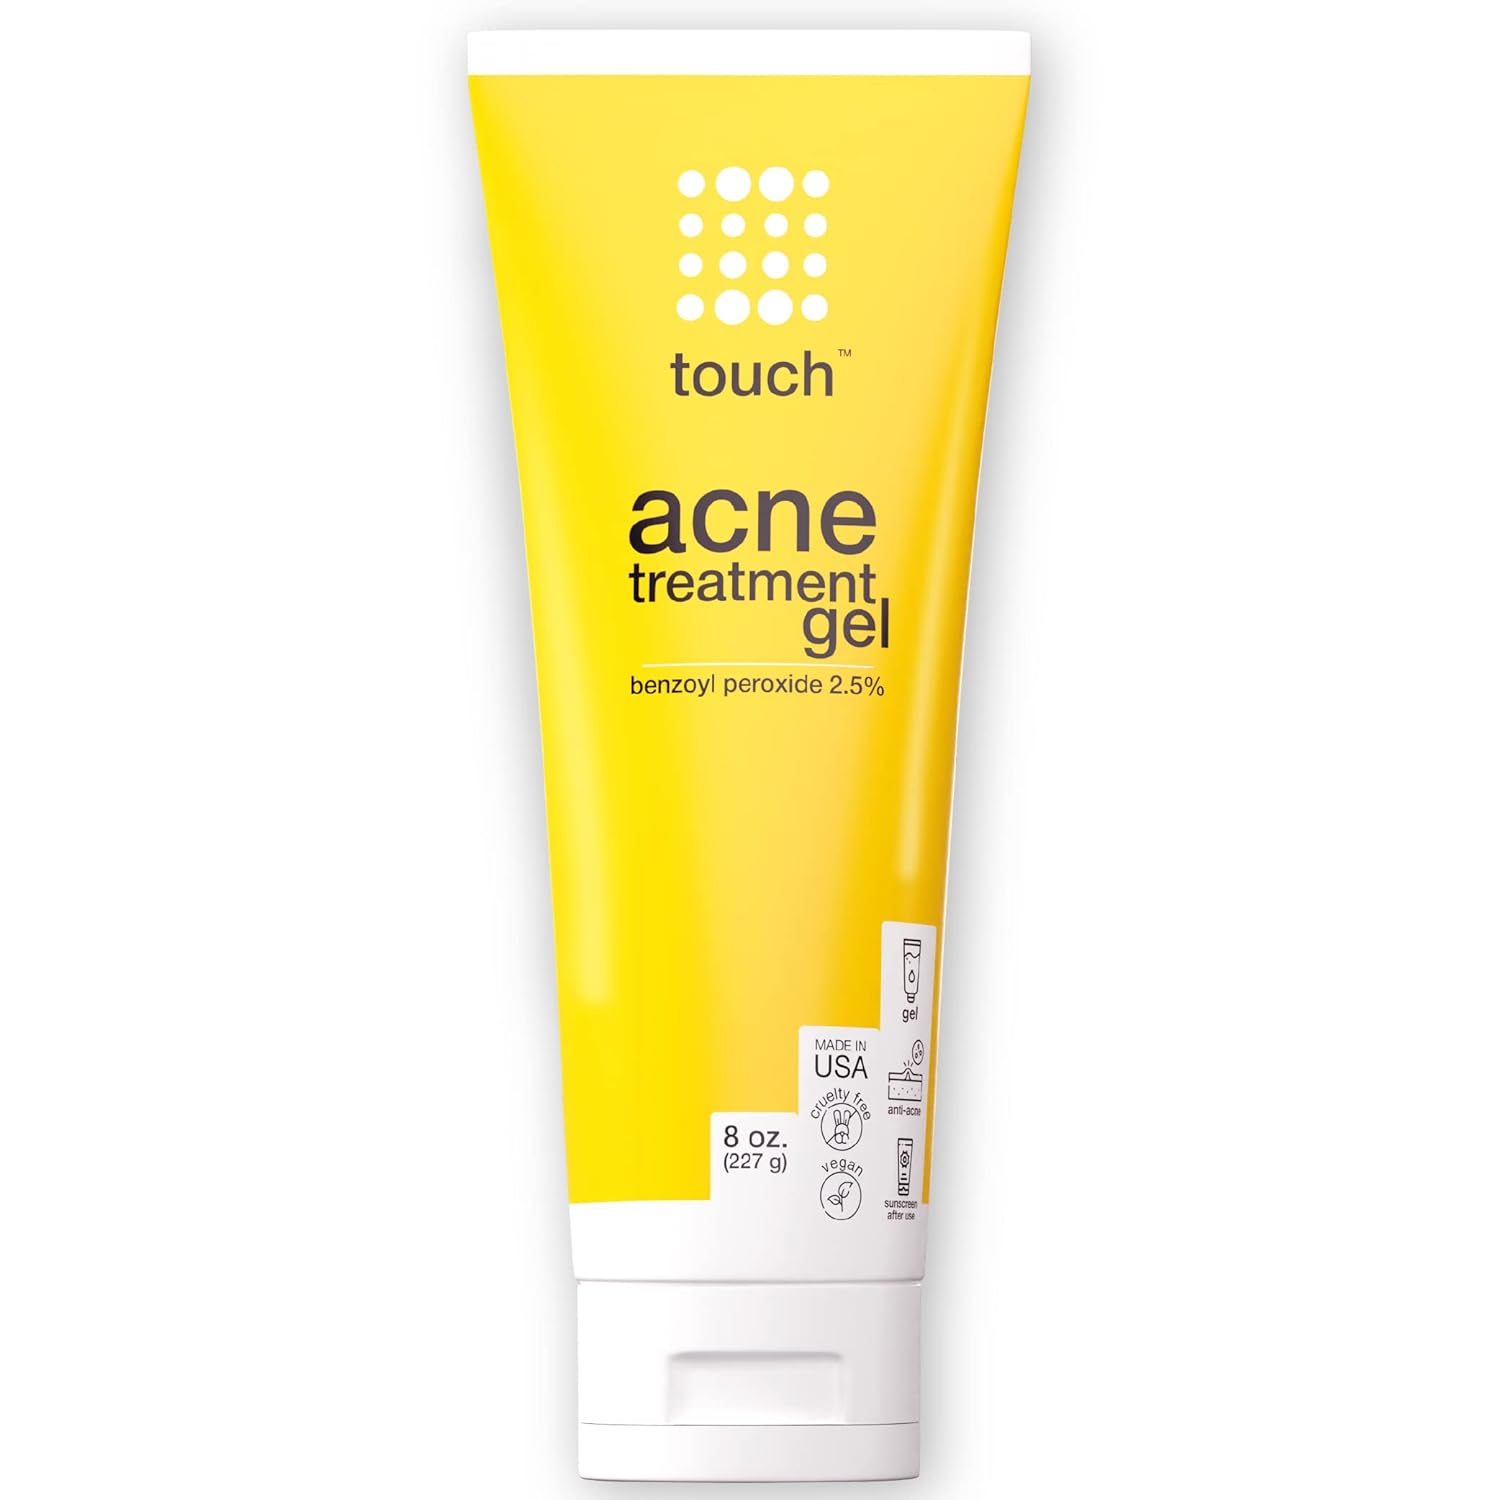 Touch Benzoyl Peroxide 2.5% Acne Treatment Gel Cream - Pimples and Cystic Acne Spot Treatment & Daily Face and Back Medication for Adults & Teens – Goes on Clear Lightweight & Non-Drying - Large 8